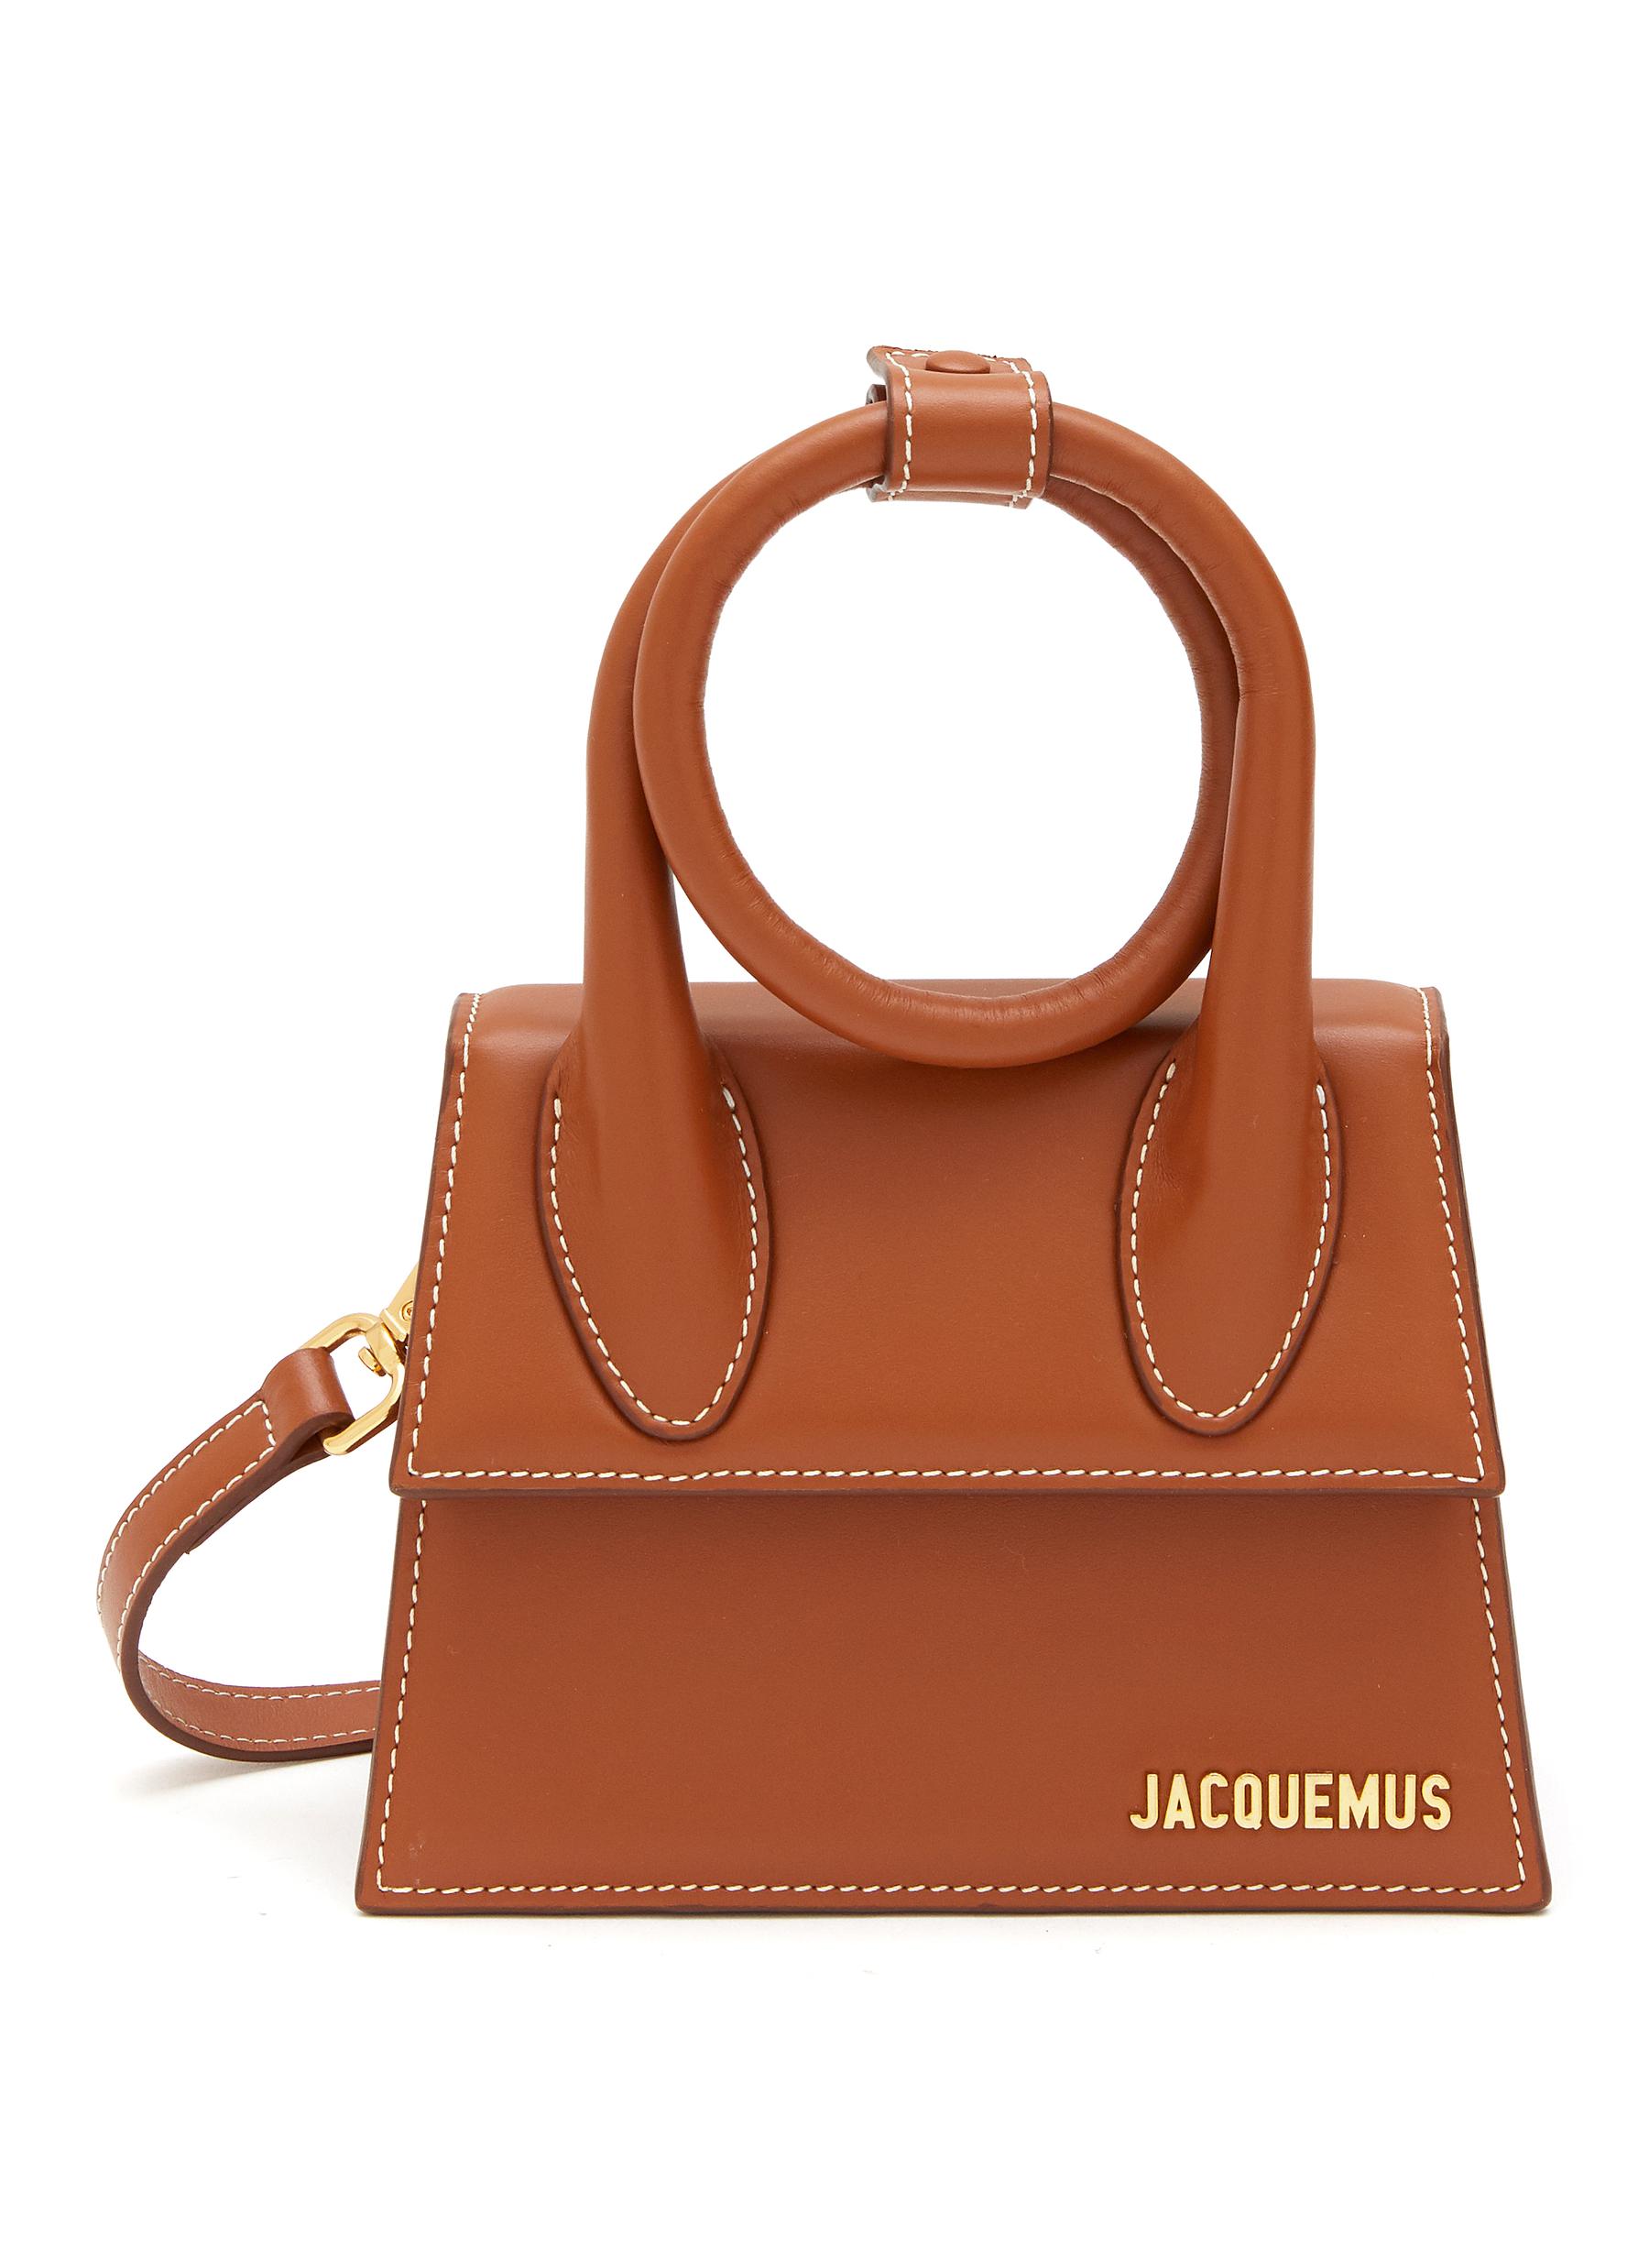 JACQUEMUS 'Le Chiquito Noeud' Convertible Top Handle Leather Crossbody Bag